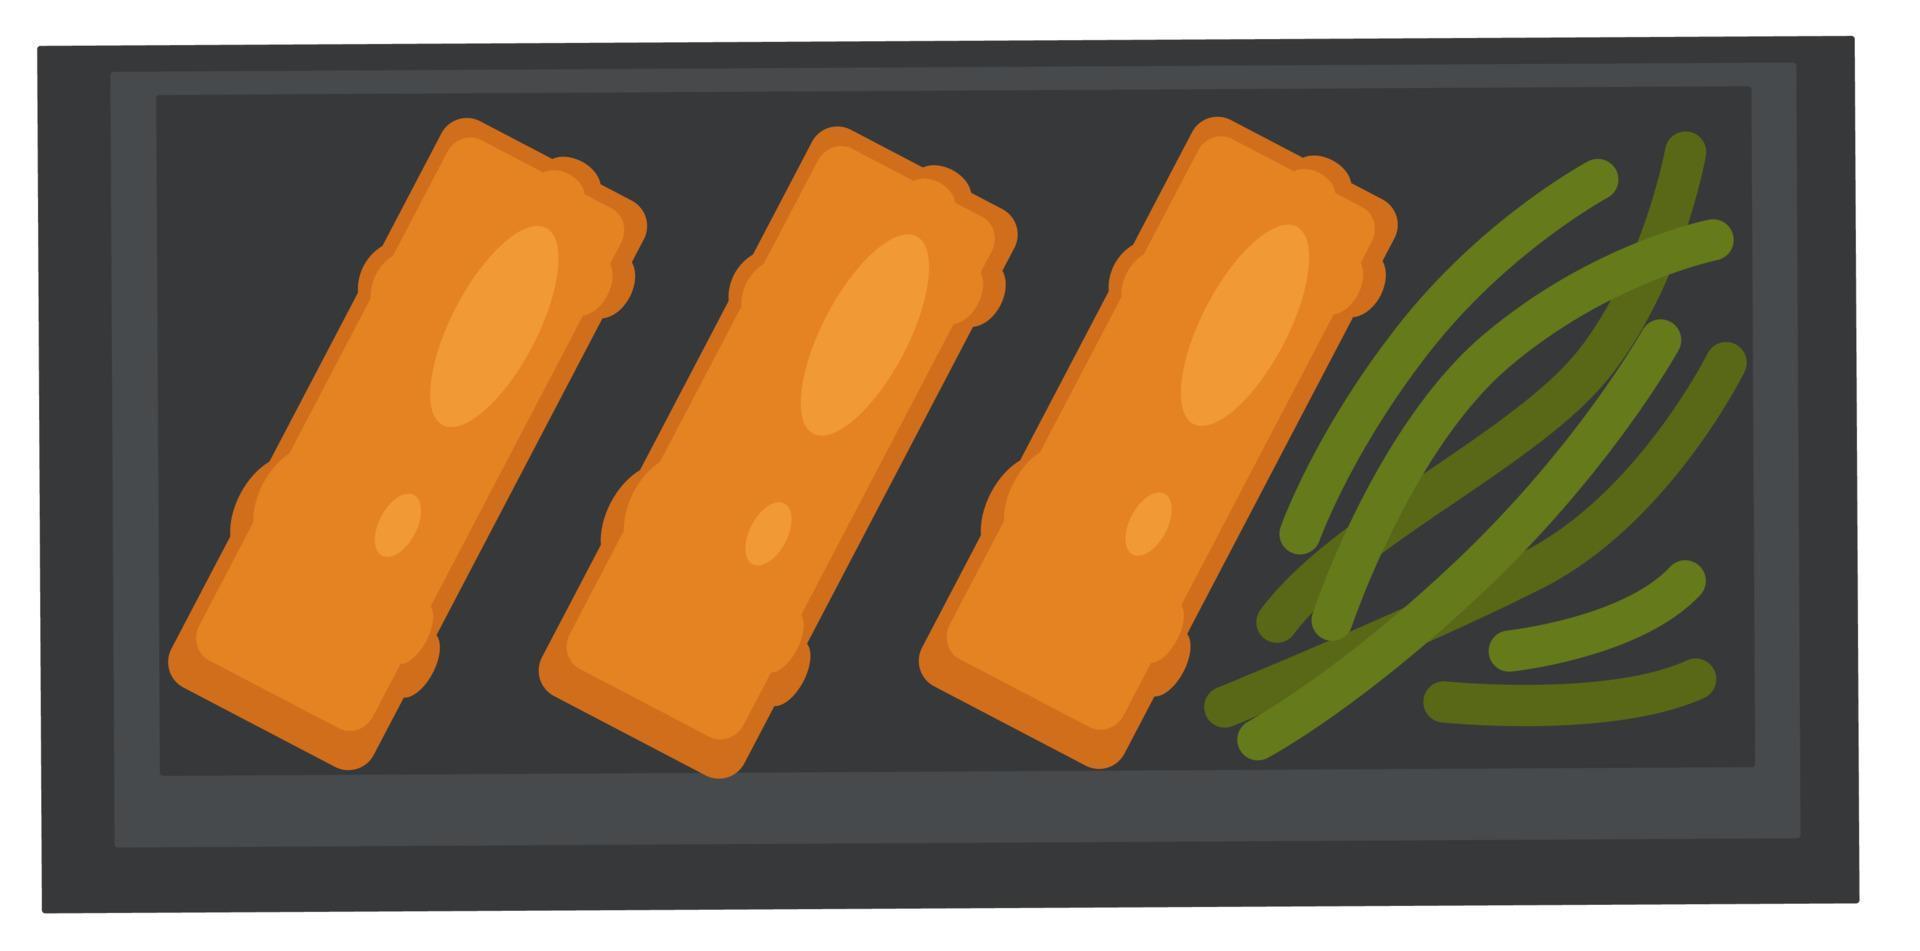 Meat rolls with asparagus served on plate vector